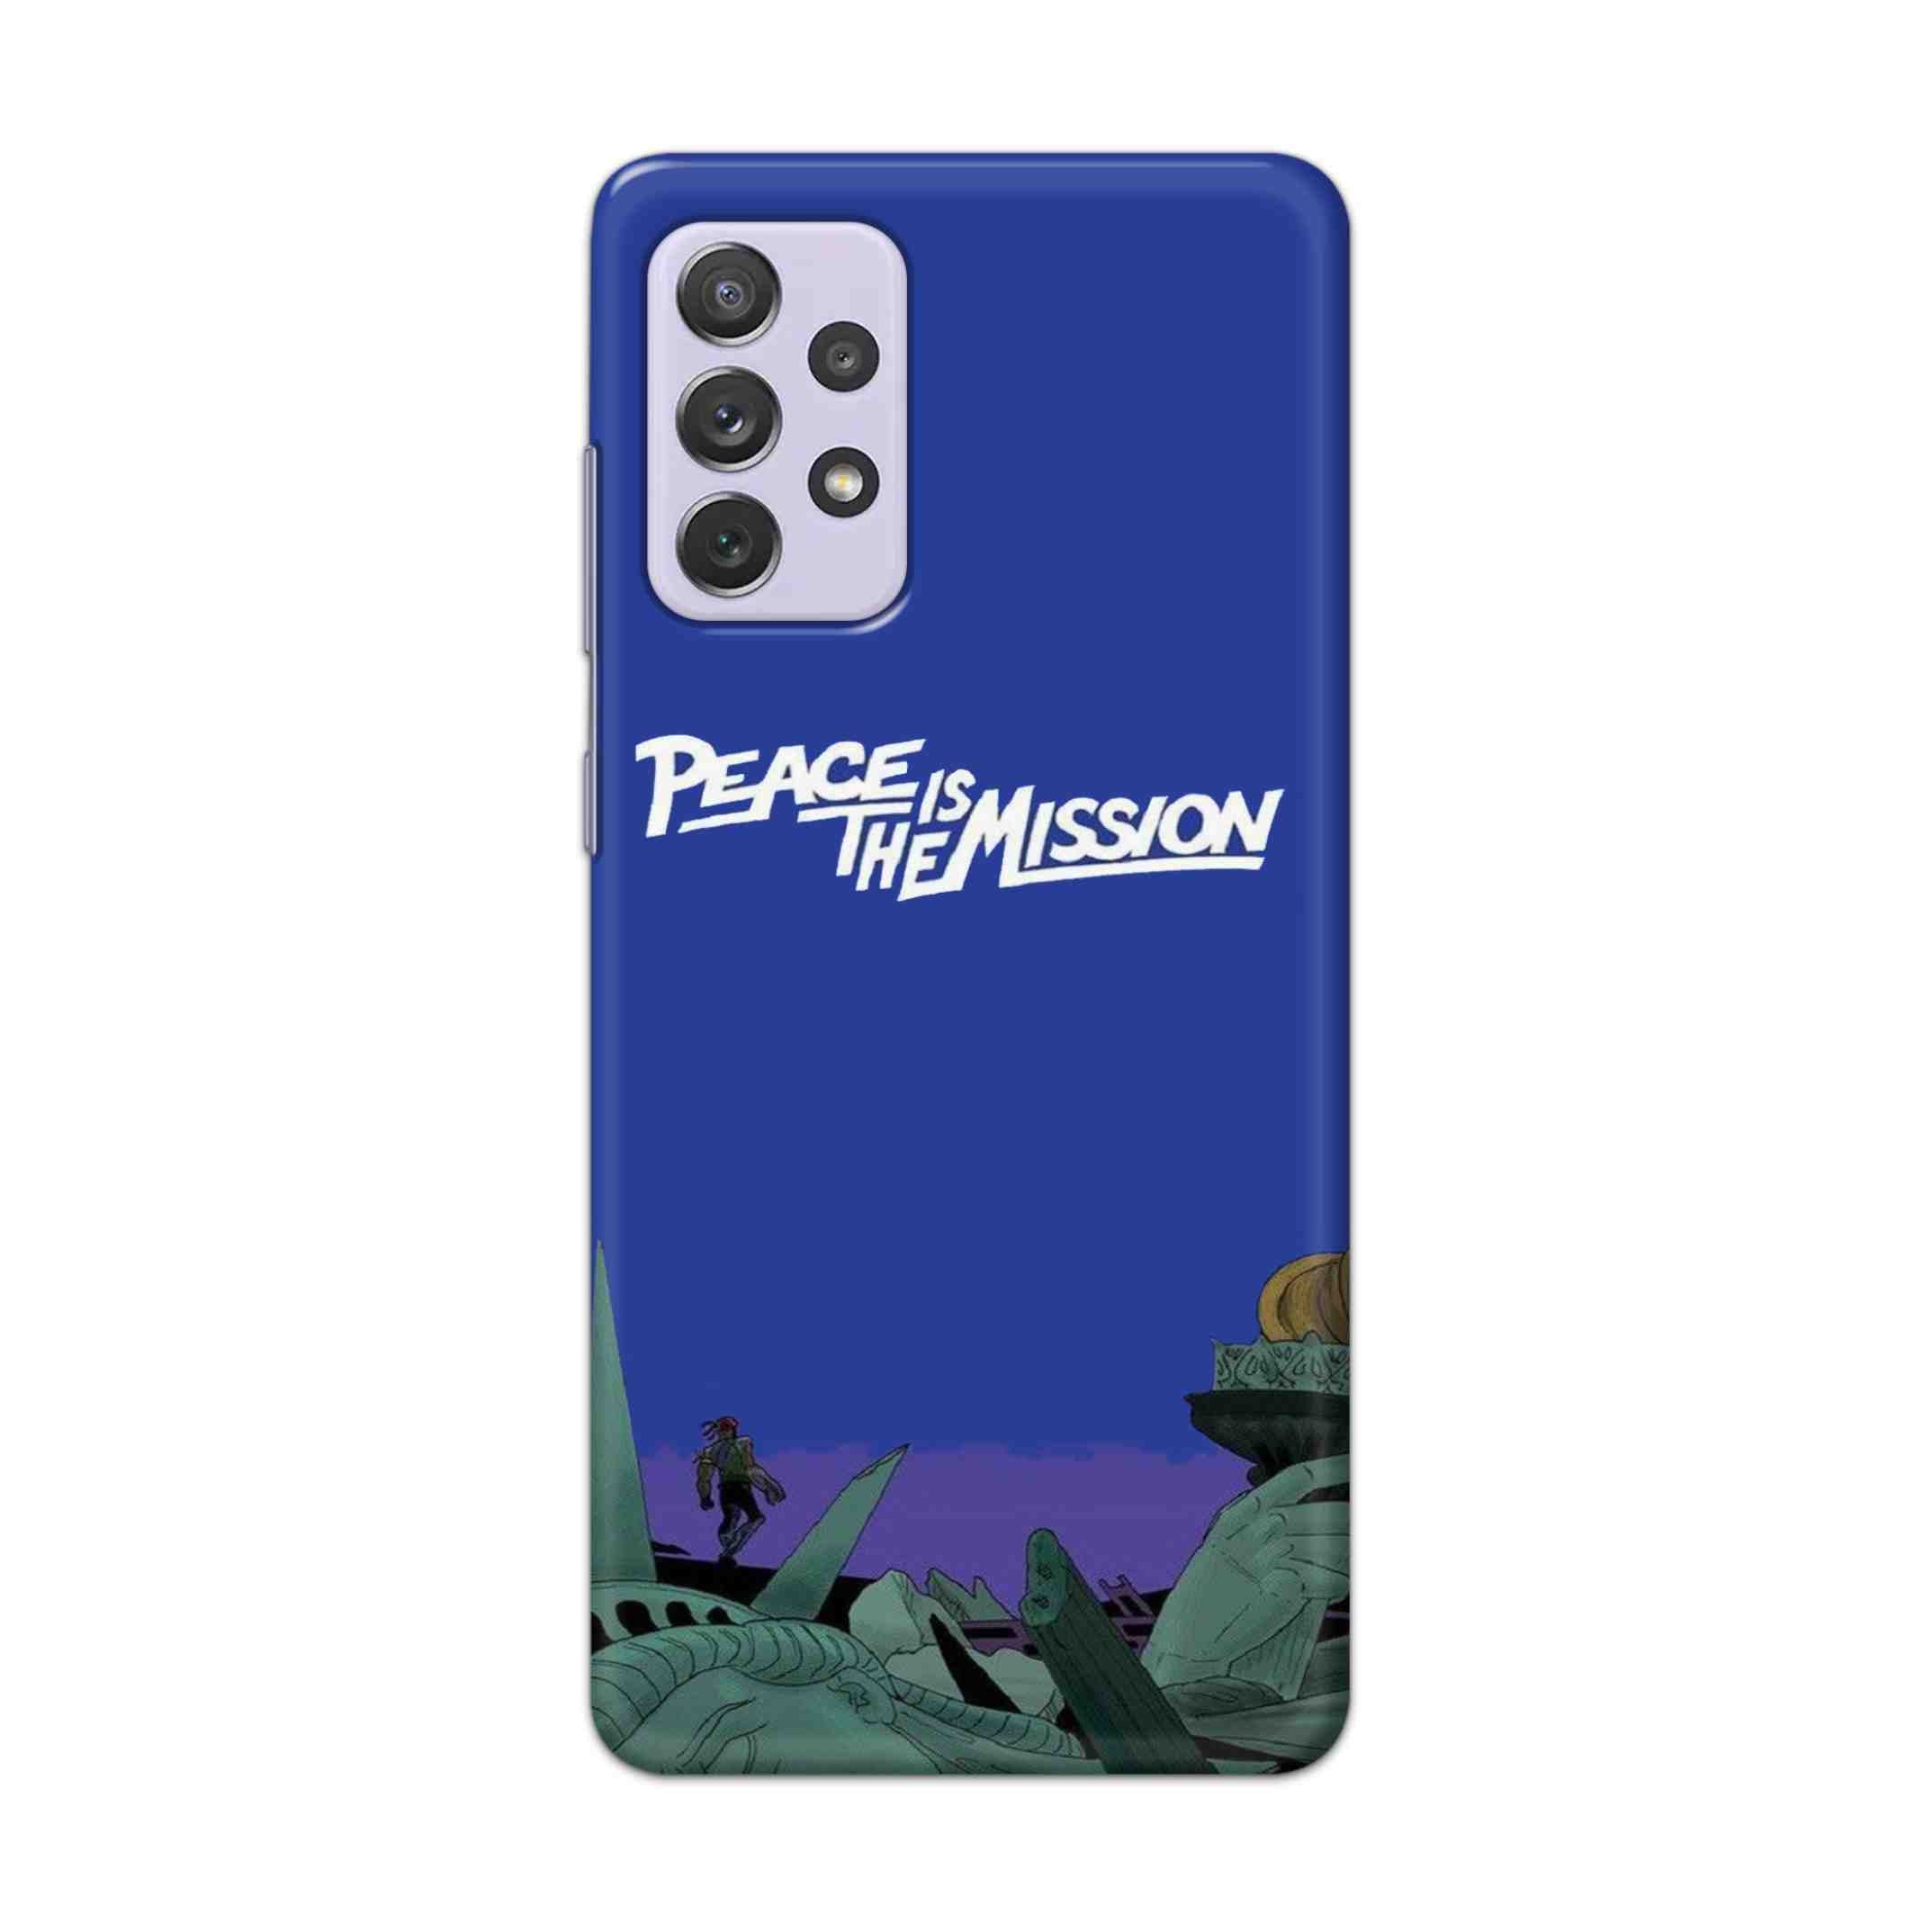 Buy Peace Is The Misson Hard Back Mobile Phone Case Cover For Samsung Galaxy A72 Online